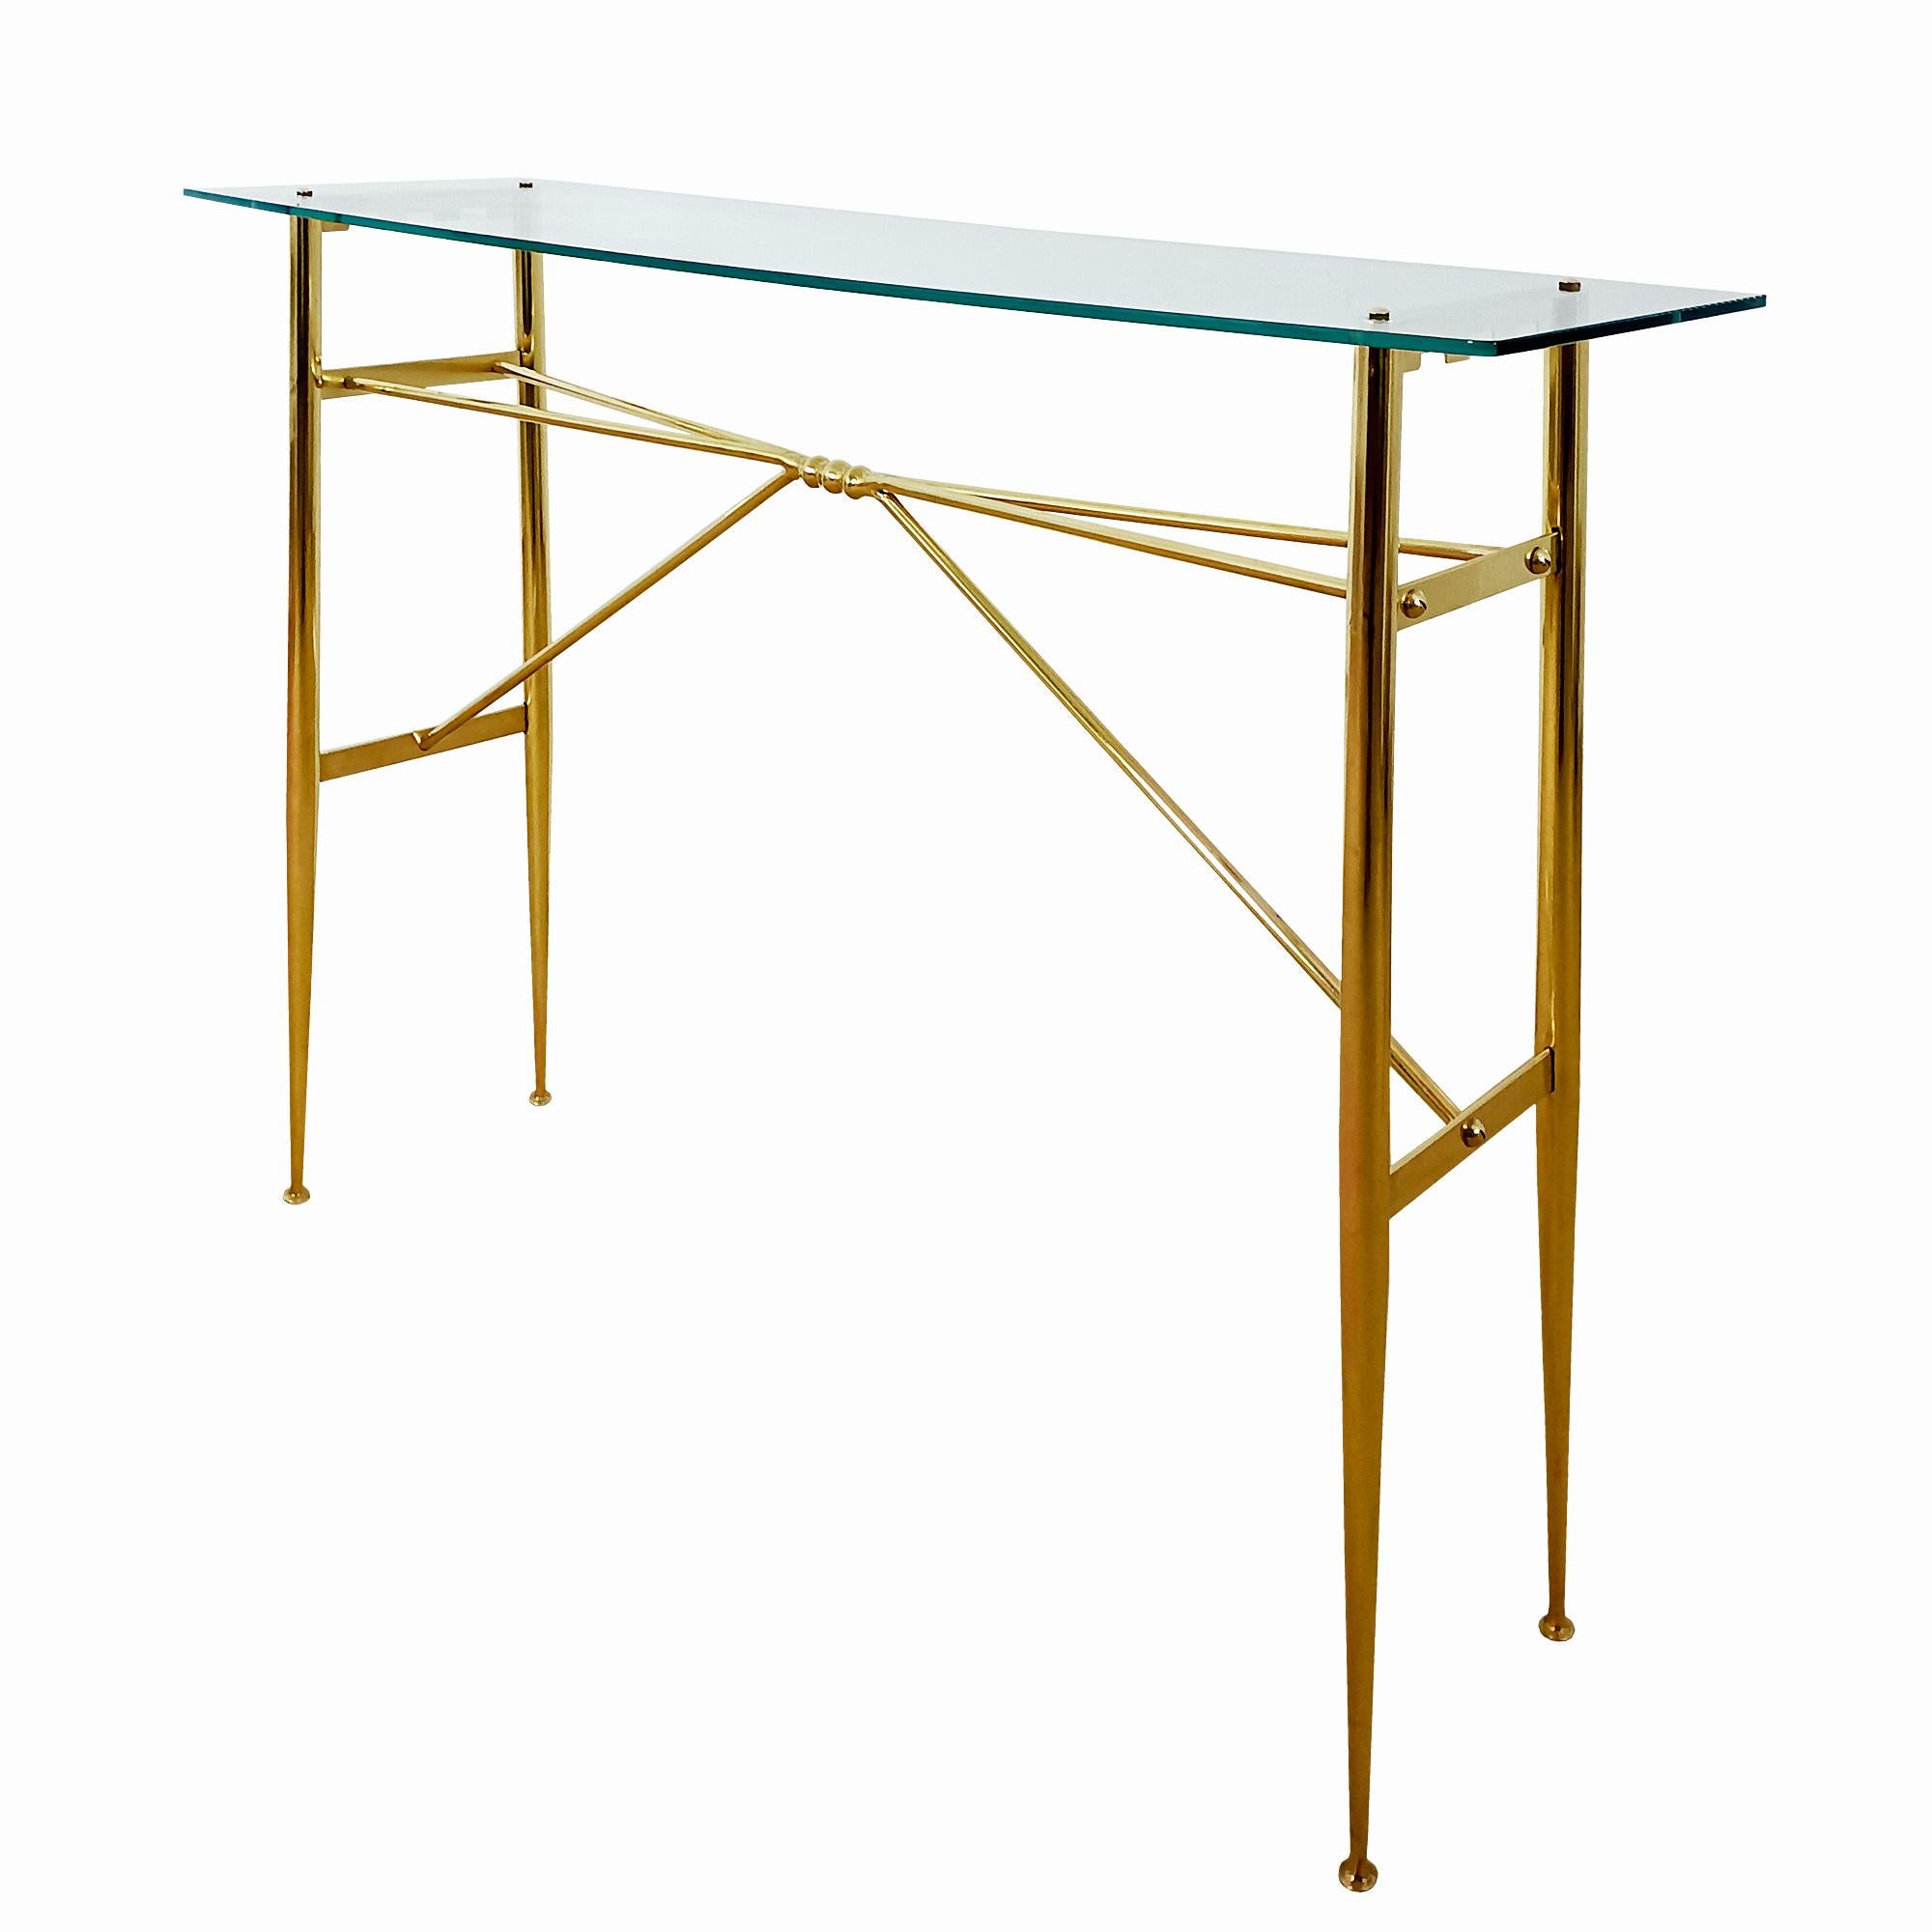 Italian Mid-Century Modern Console Table in Solid Brass and a Glass Shelf, Italy For Sale